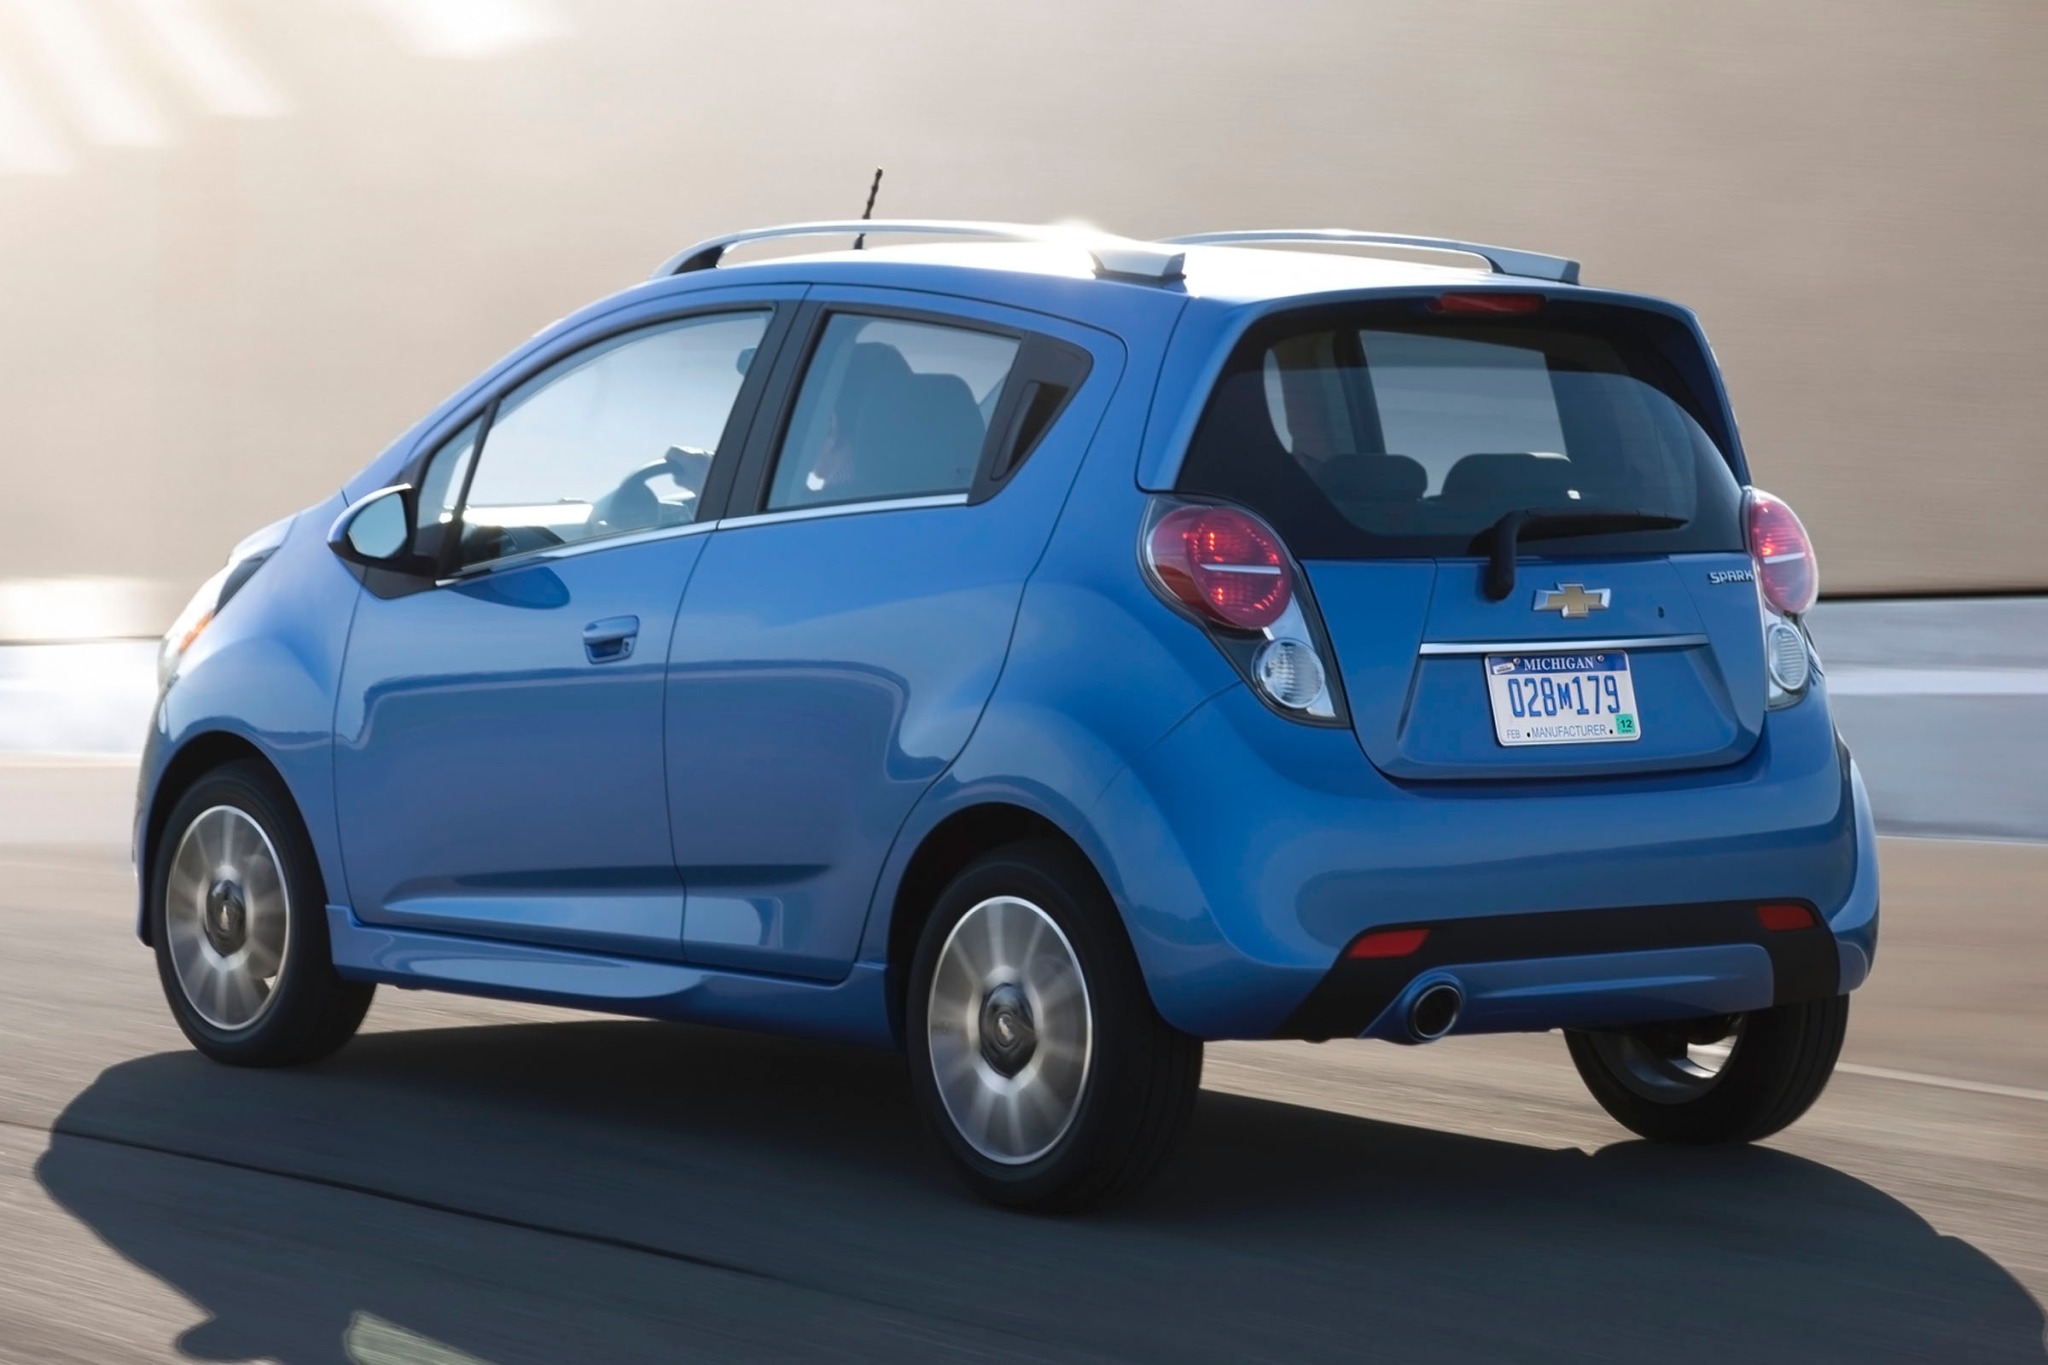 2015 Chevrolet Spark LS Manual VIN Number Search